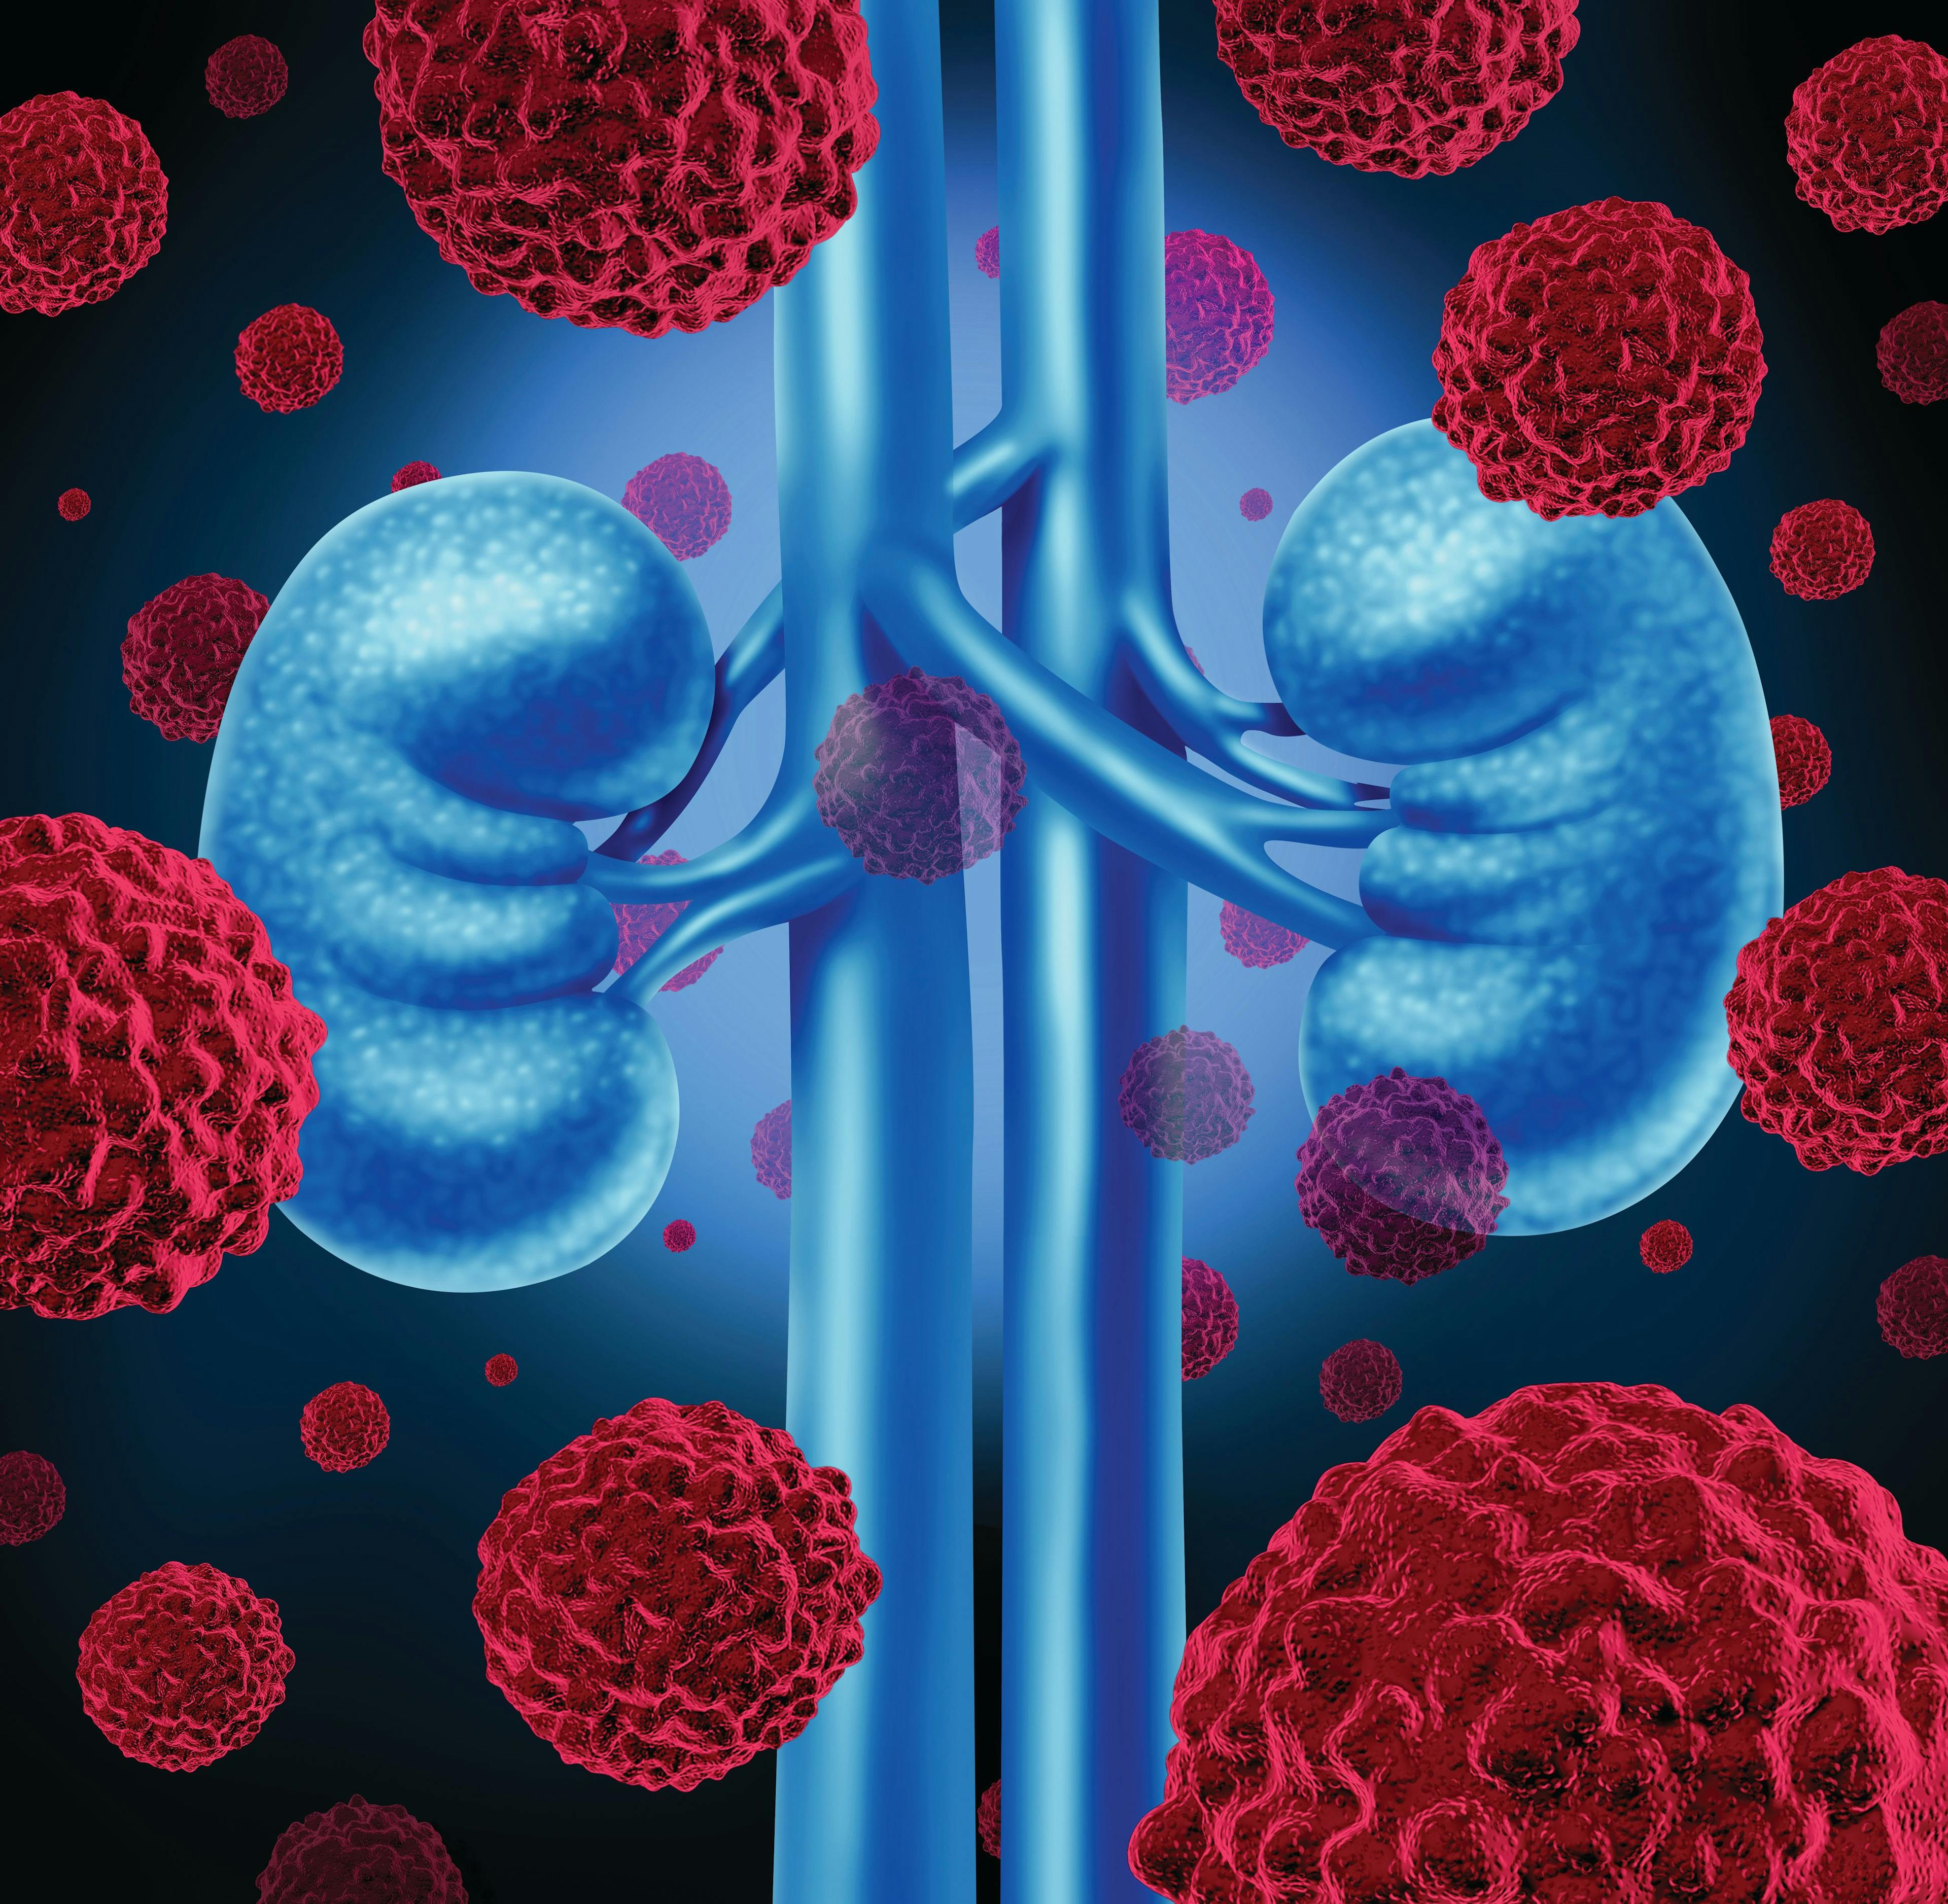 Finerenone May Protect Patients With Chronic Kidney Disease From Pneumonia-Related Severe Adverse Events